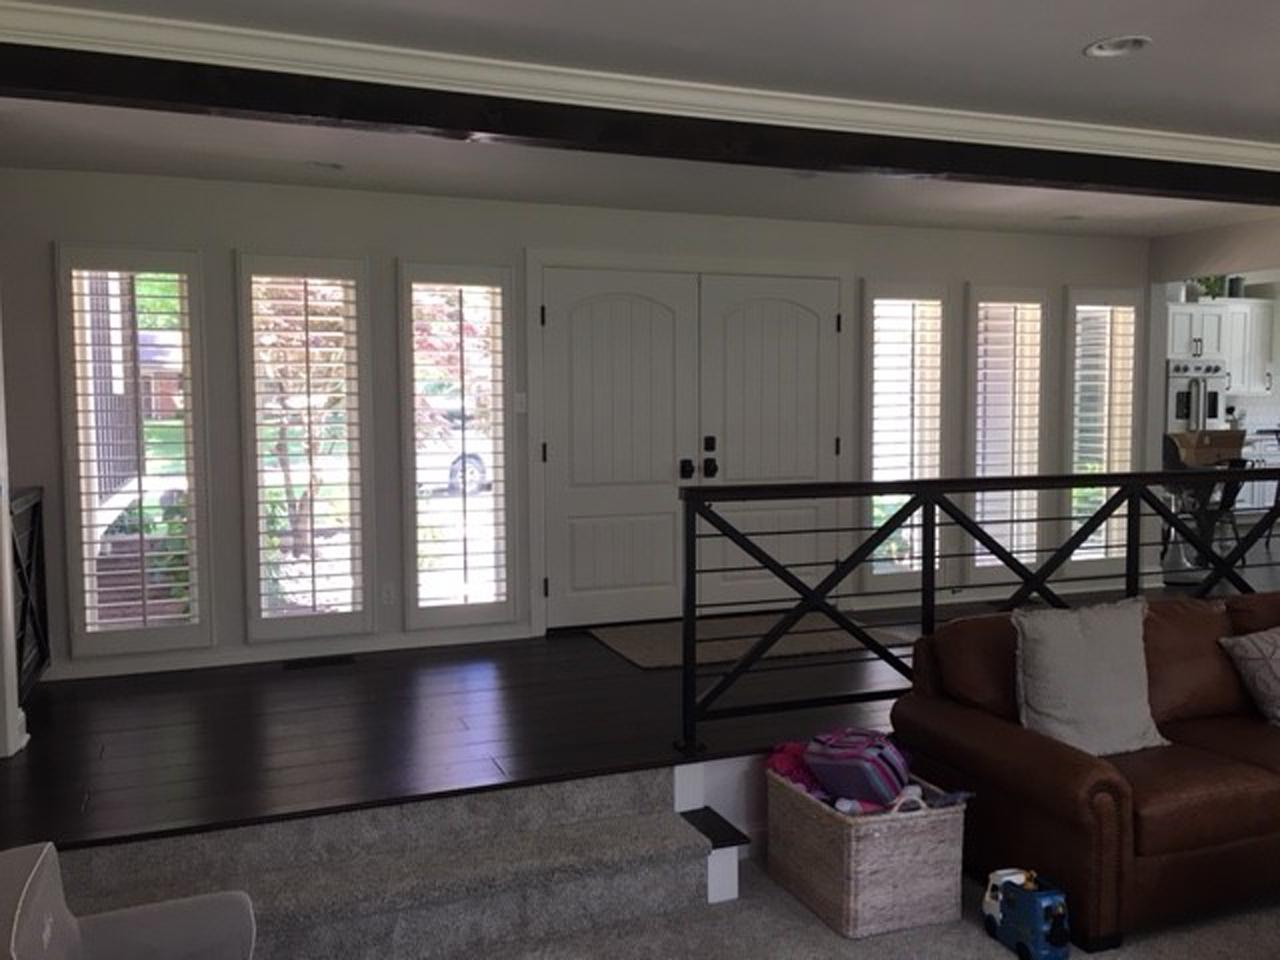 Windows by double front doors with interior shutters